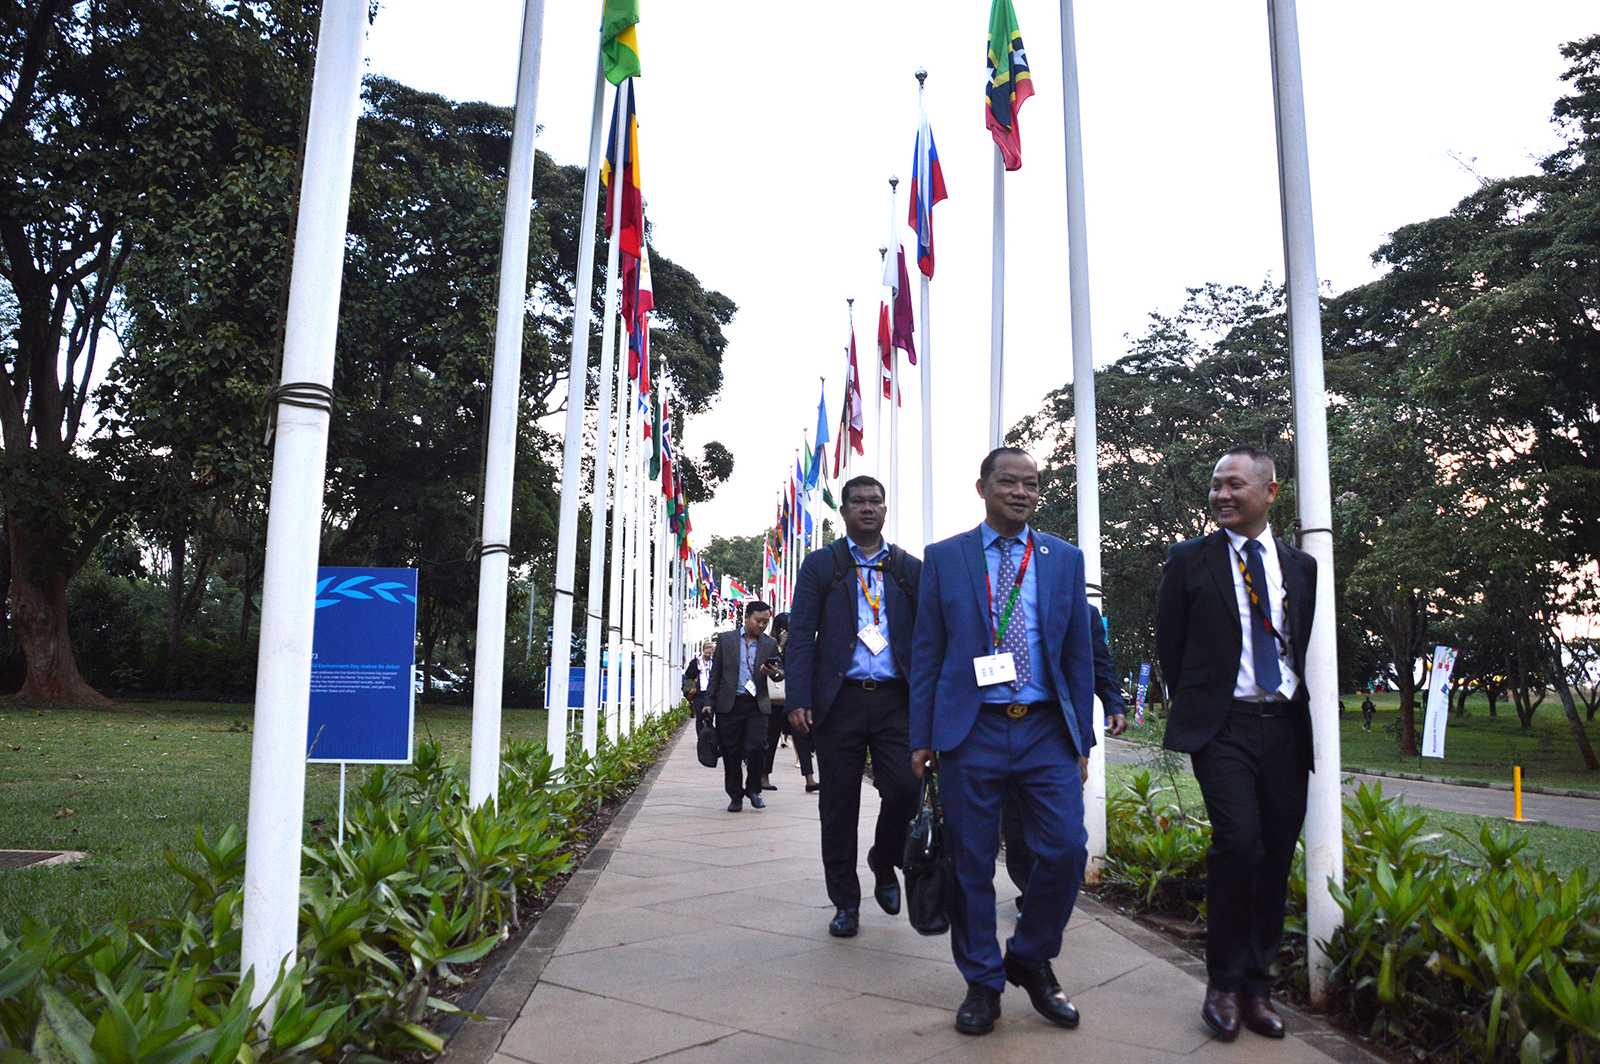 Delegates at the UNEA-6 conference navigate the United Nations Environment Programme (UNEP) headquarters in Nairobi, Kenya. (RNS photo/Fredrick Nzwili)